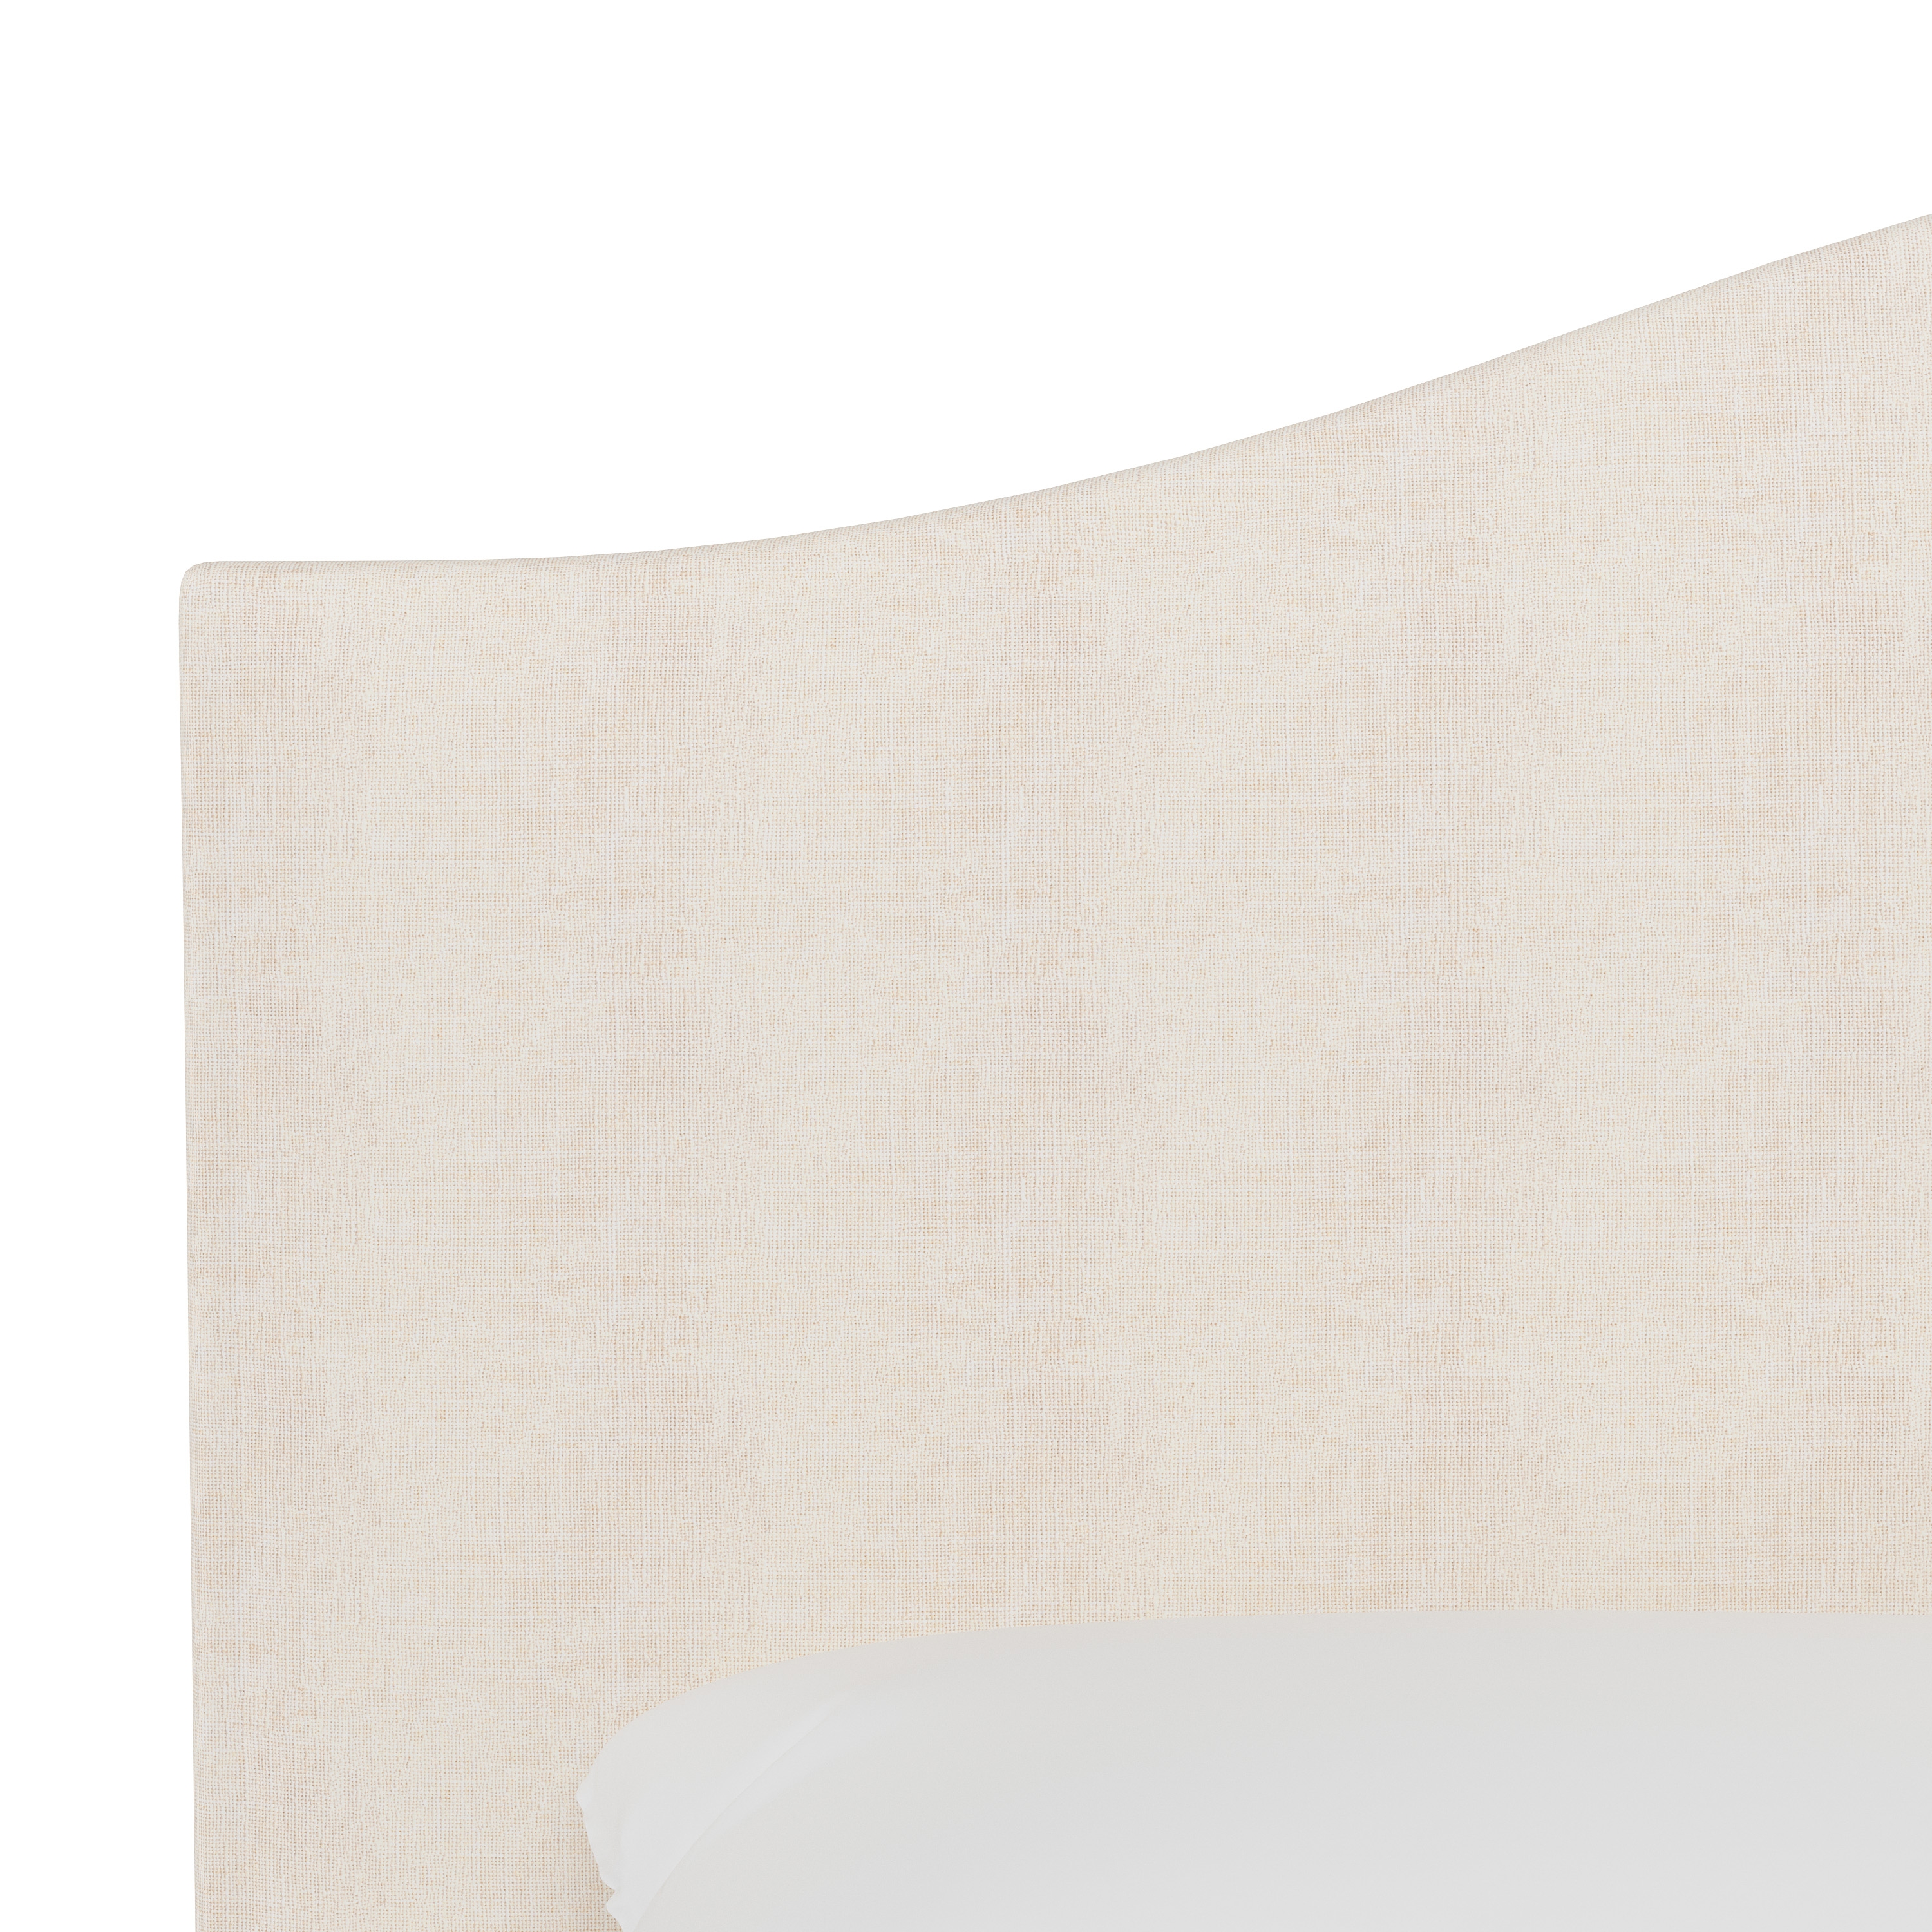 King Kenmore Bed in Zuma White - Image 3